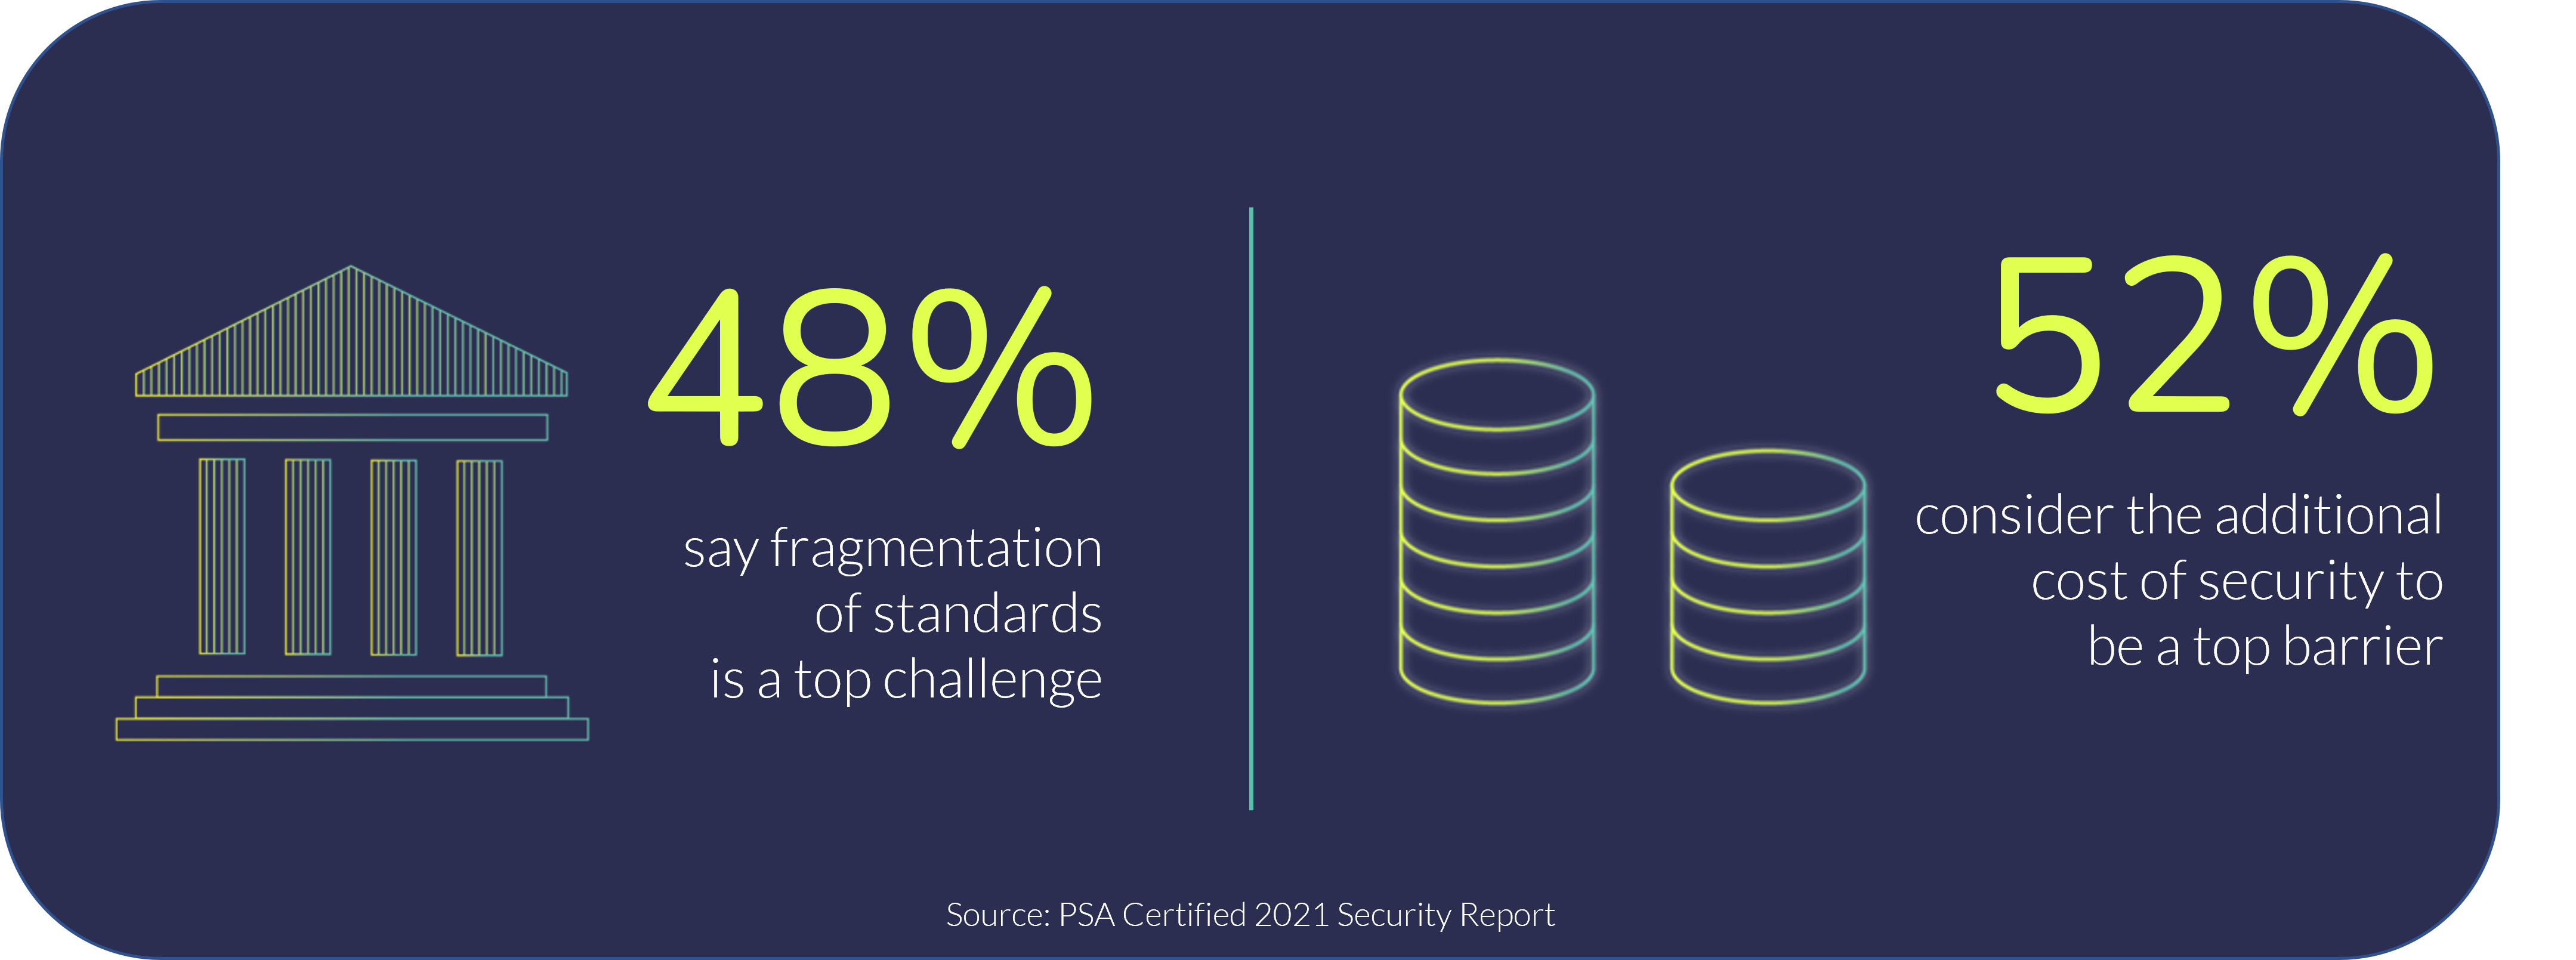 The PSA Certified 2021 Security Report identified that significant IoT security challenges remain for the ecosystem, including regulatory fragmentation and the additional cost.